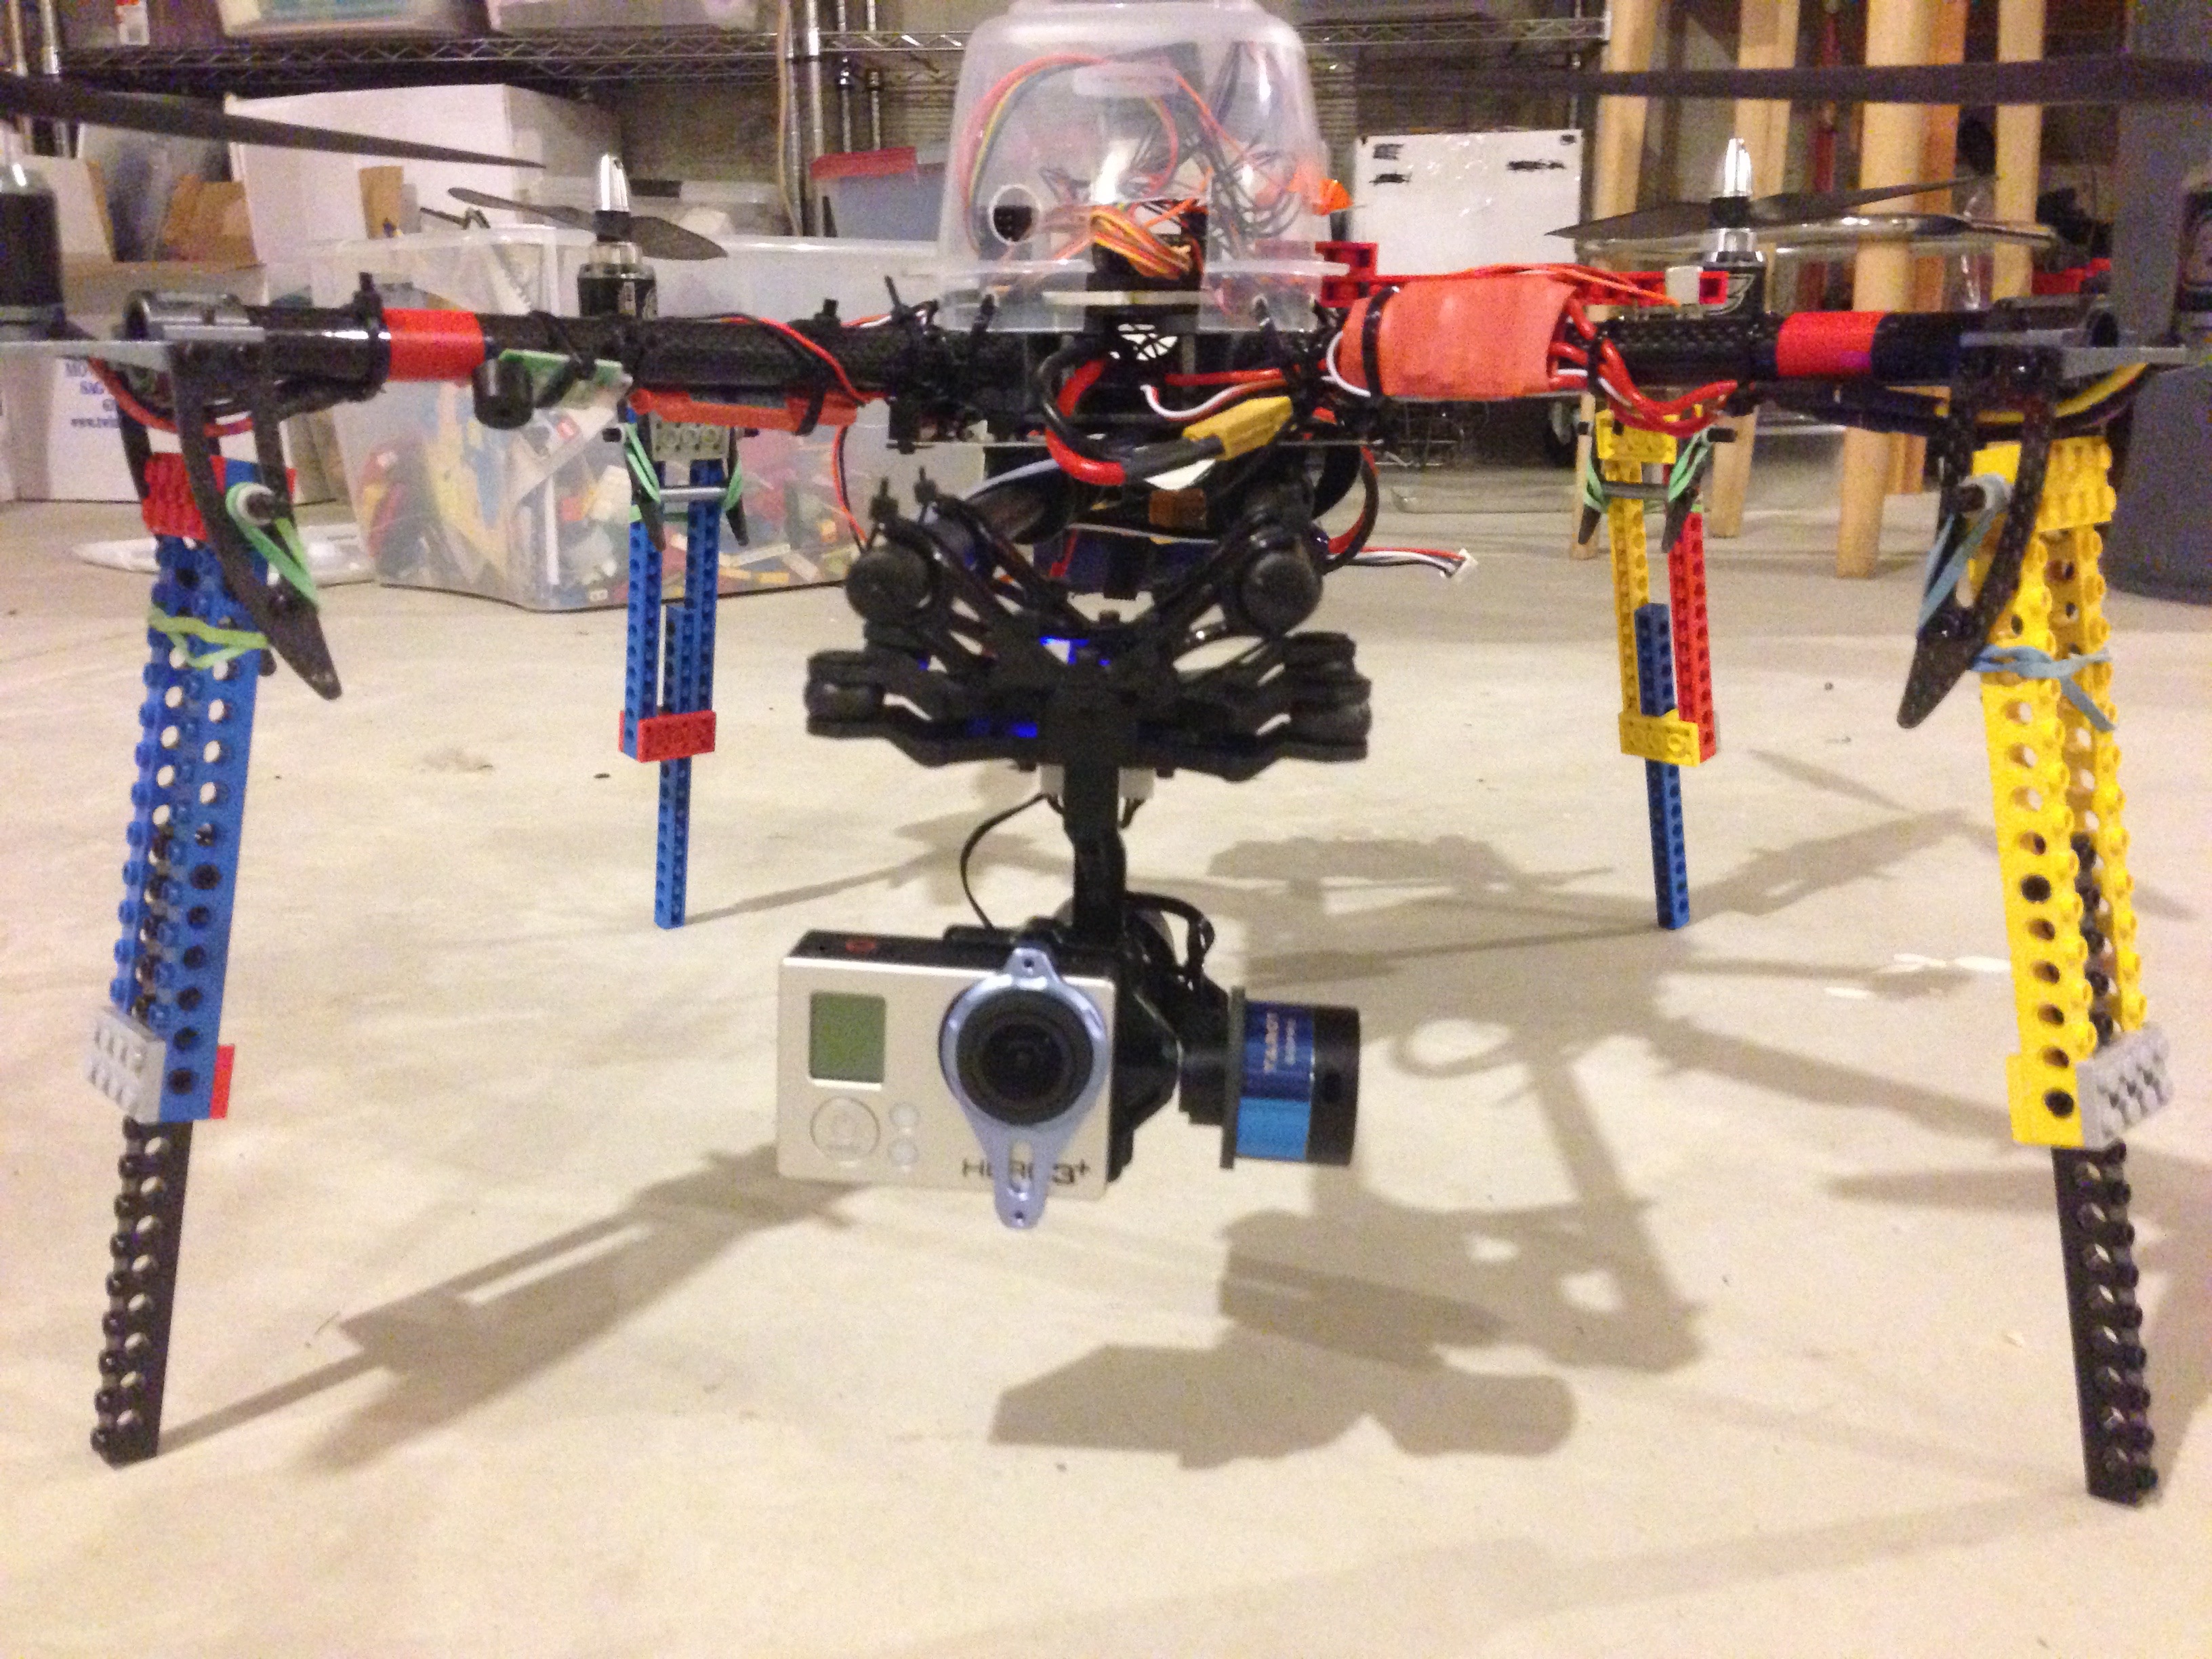 Quadcopter with Lego legs